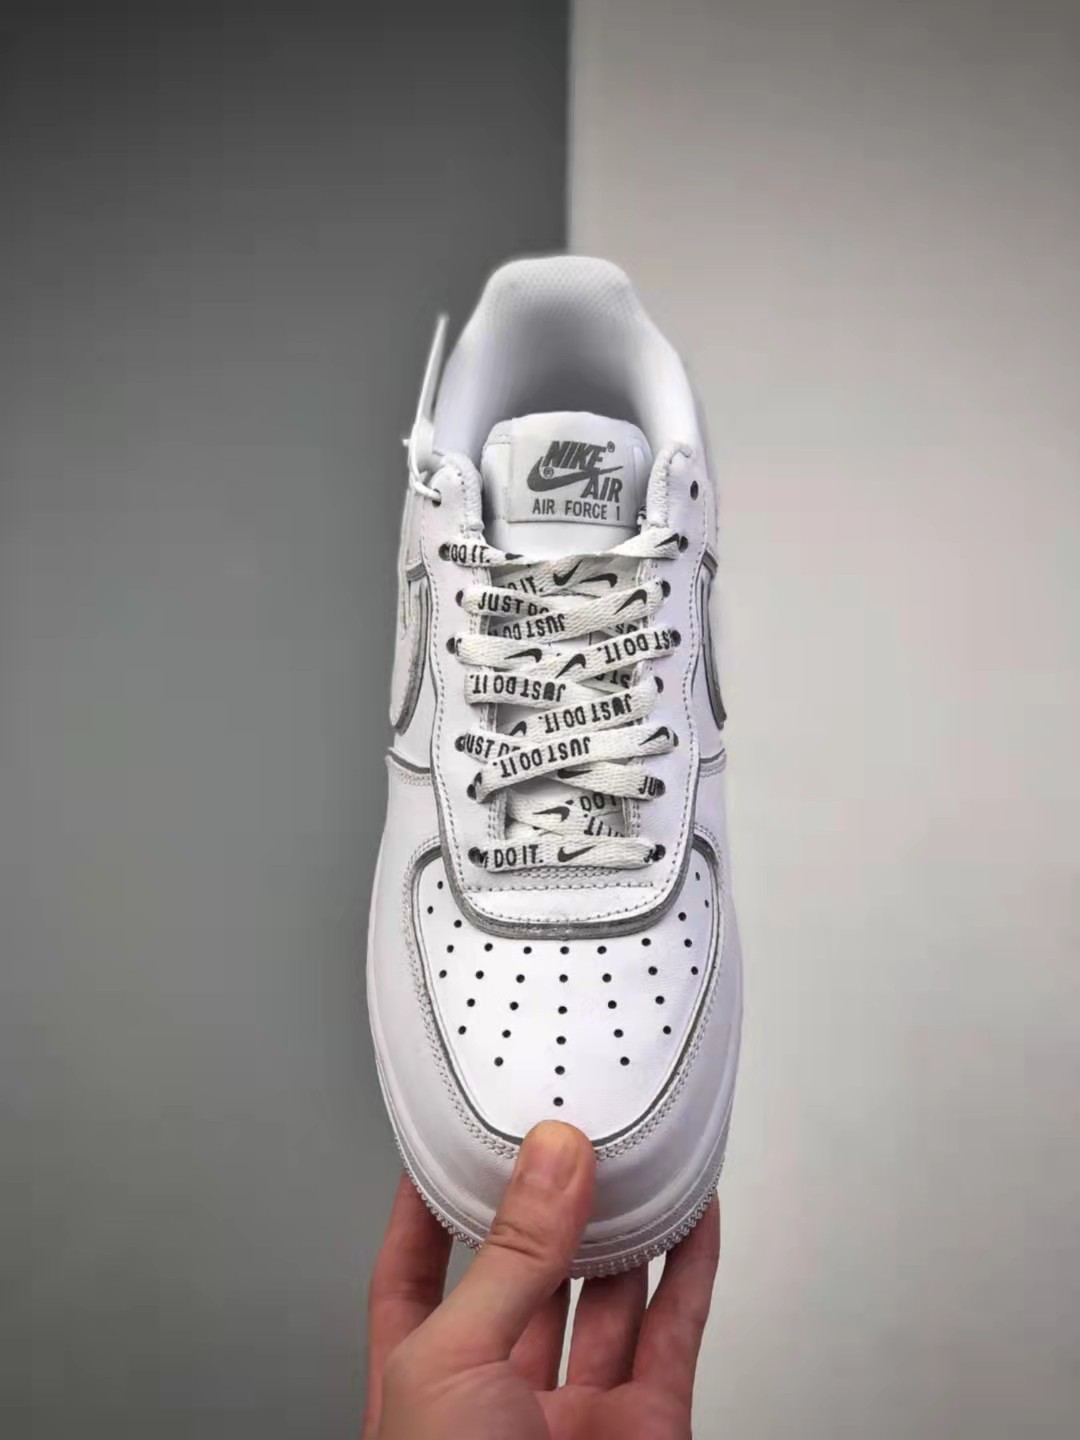 Nike Air Force 1 Low Stussy White Silver Reflective BQ6246-019 - Stylish and Reflective Sneakers for Unparalleled Style and Durability